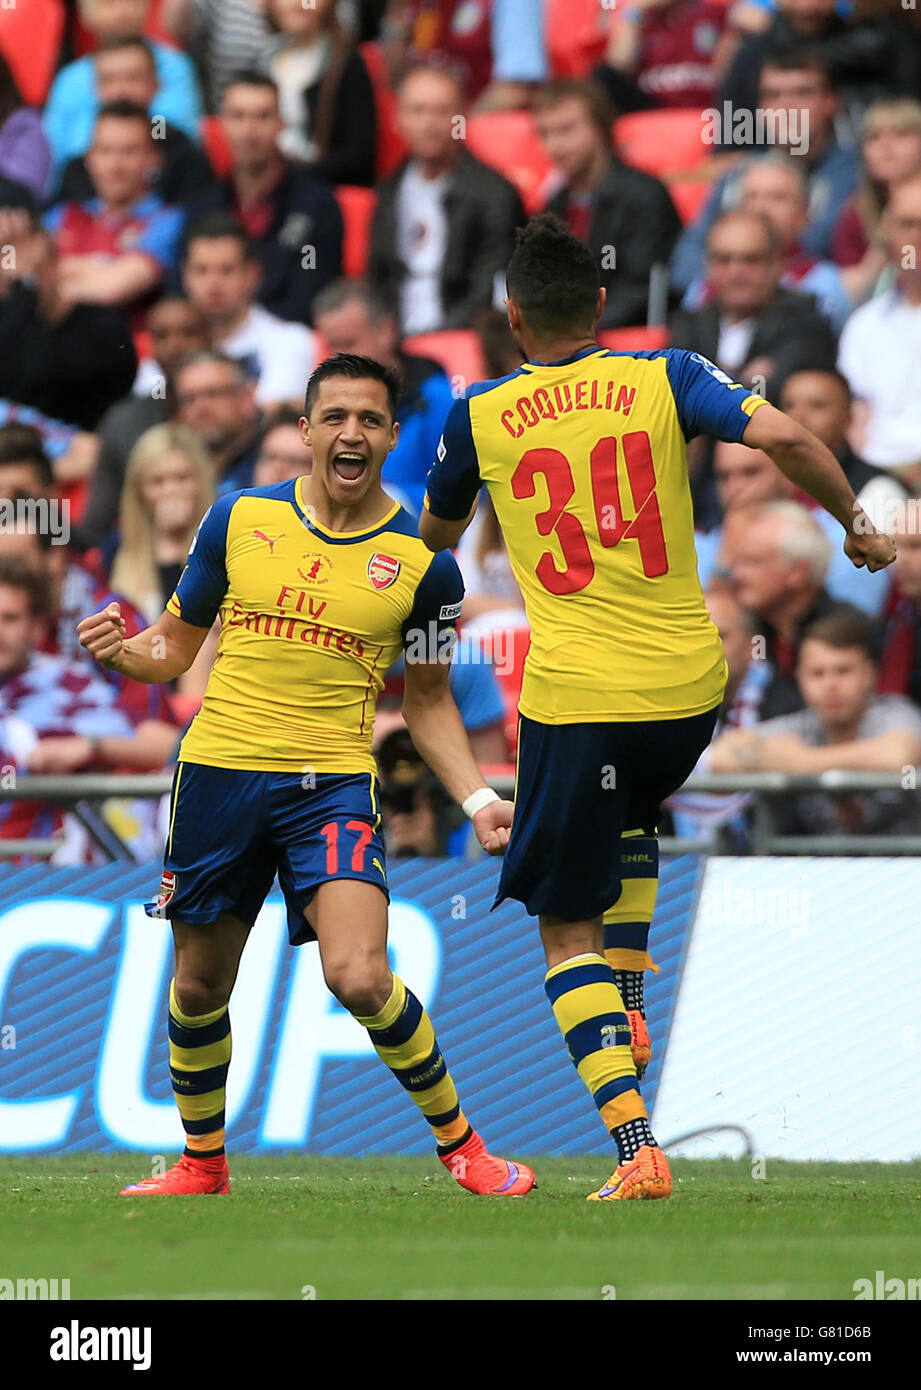 Arsenal's Alexis Sanchez celebrates scoring their second goal of the game with team-mate Francis Coquelin (right) during the FA Cup Final at Wembley Stadium, London. PRESS ASSOCIATION Photo. Picture date: Saturday May 30, 2015. See PA Story SOCCER FA Cup. Photo credit should read: Nick Potts/PA Wire. RESTRICTIONS: Maximum 45 images during a match. No video emulation or promotion as 'live'. No use in games, competitions, merchandise, betting or single club/player services. No use with unofficial audio, video, data, fixture Stock Photo